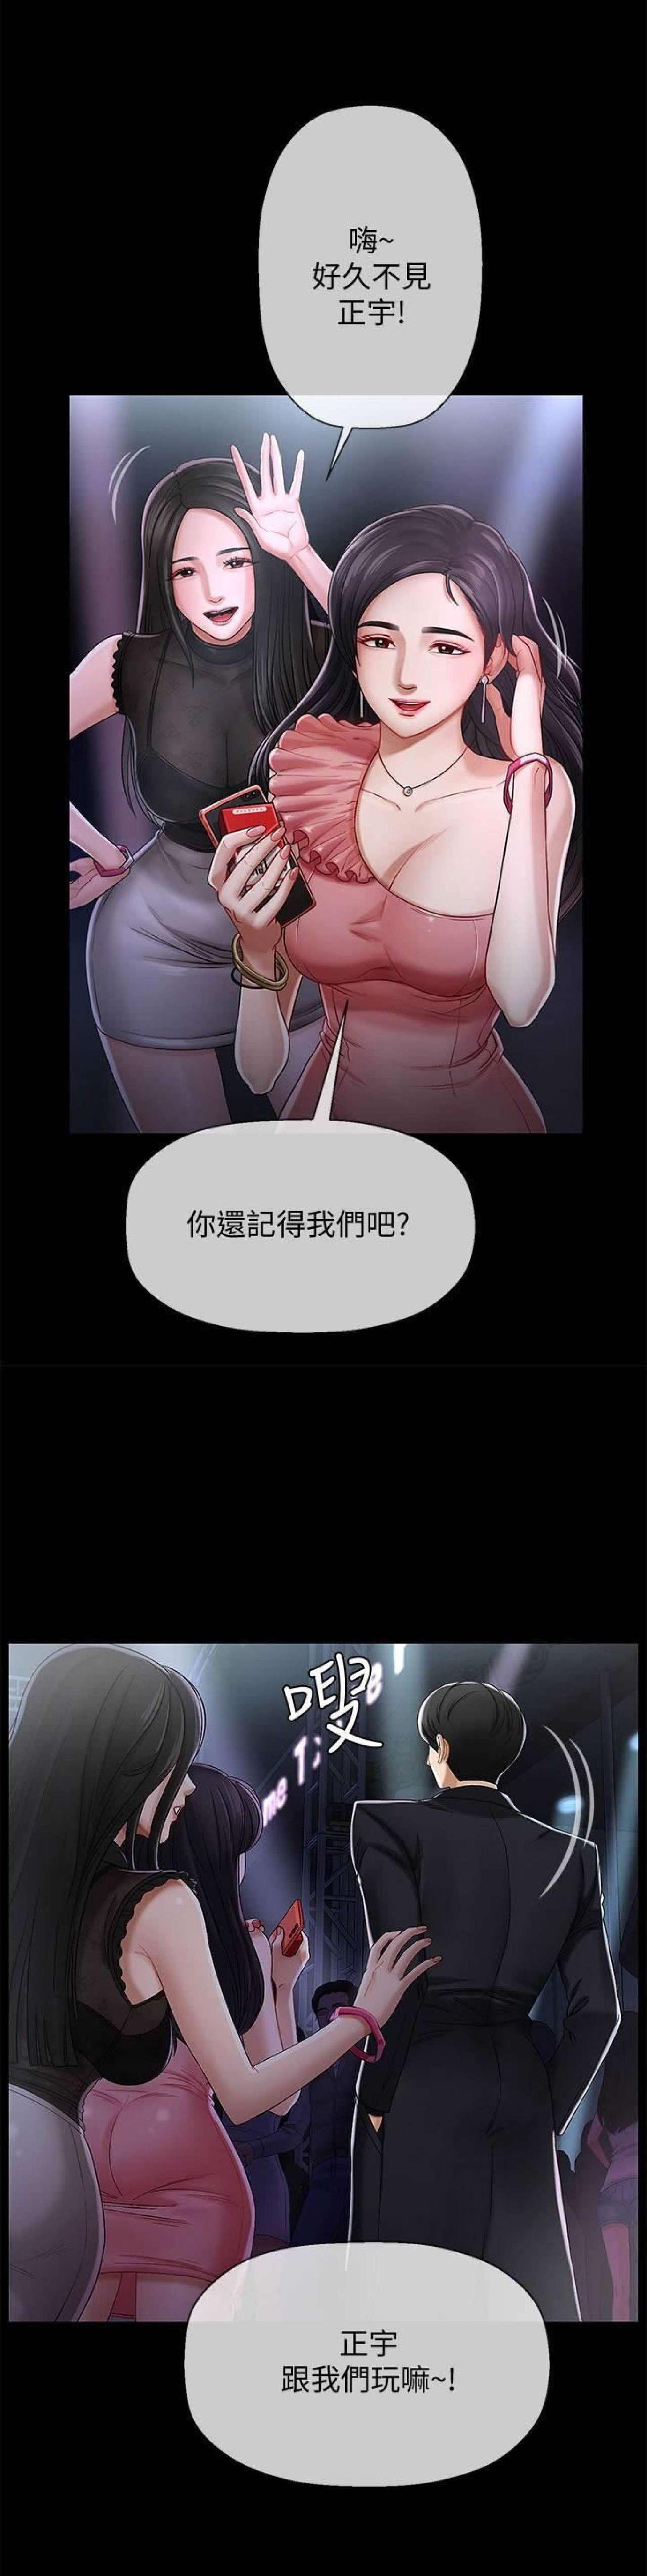 Mofos 坏老师 | PHYSICAL CLASSROOM 2 Guyonshemale - Page 2